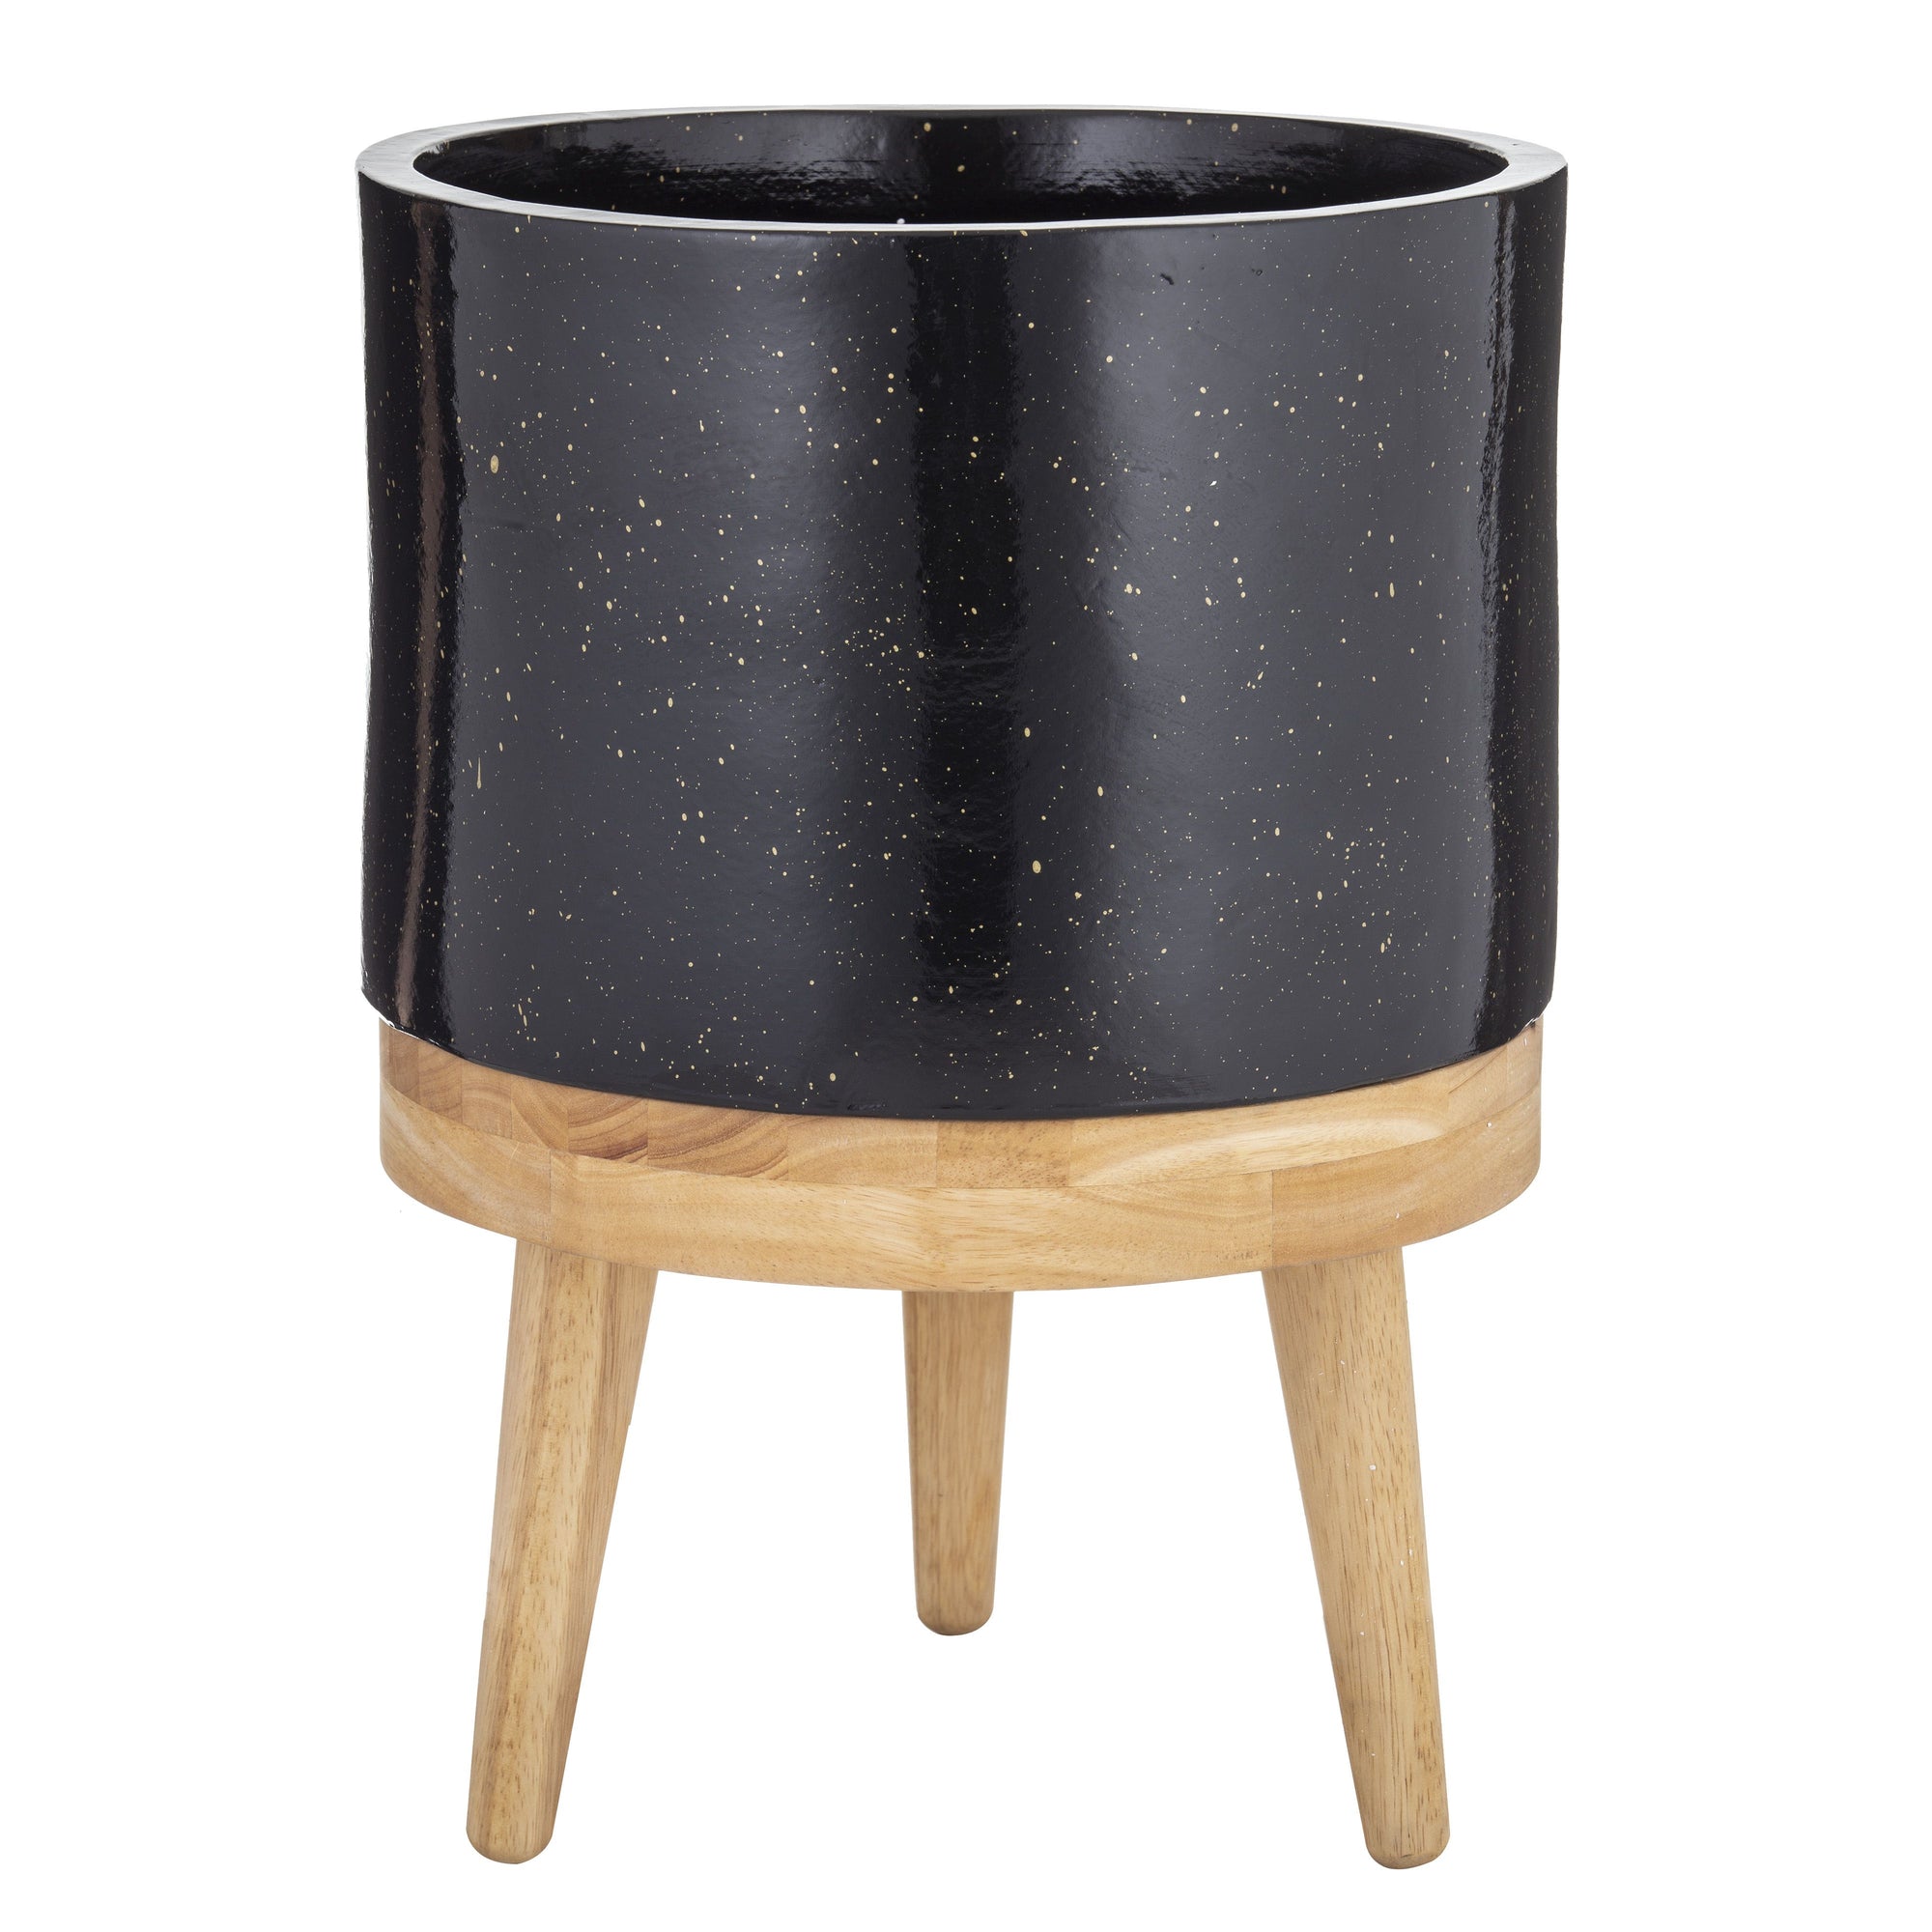 Heal pot on stand BLACK